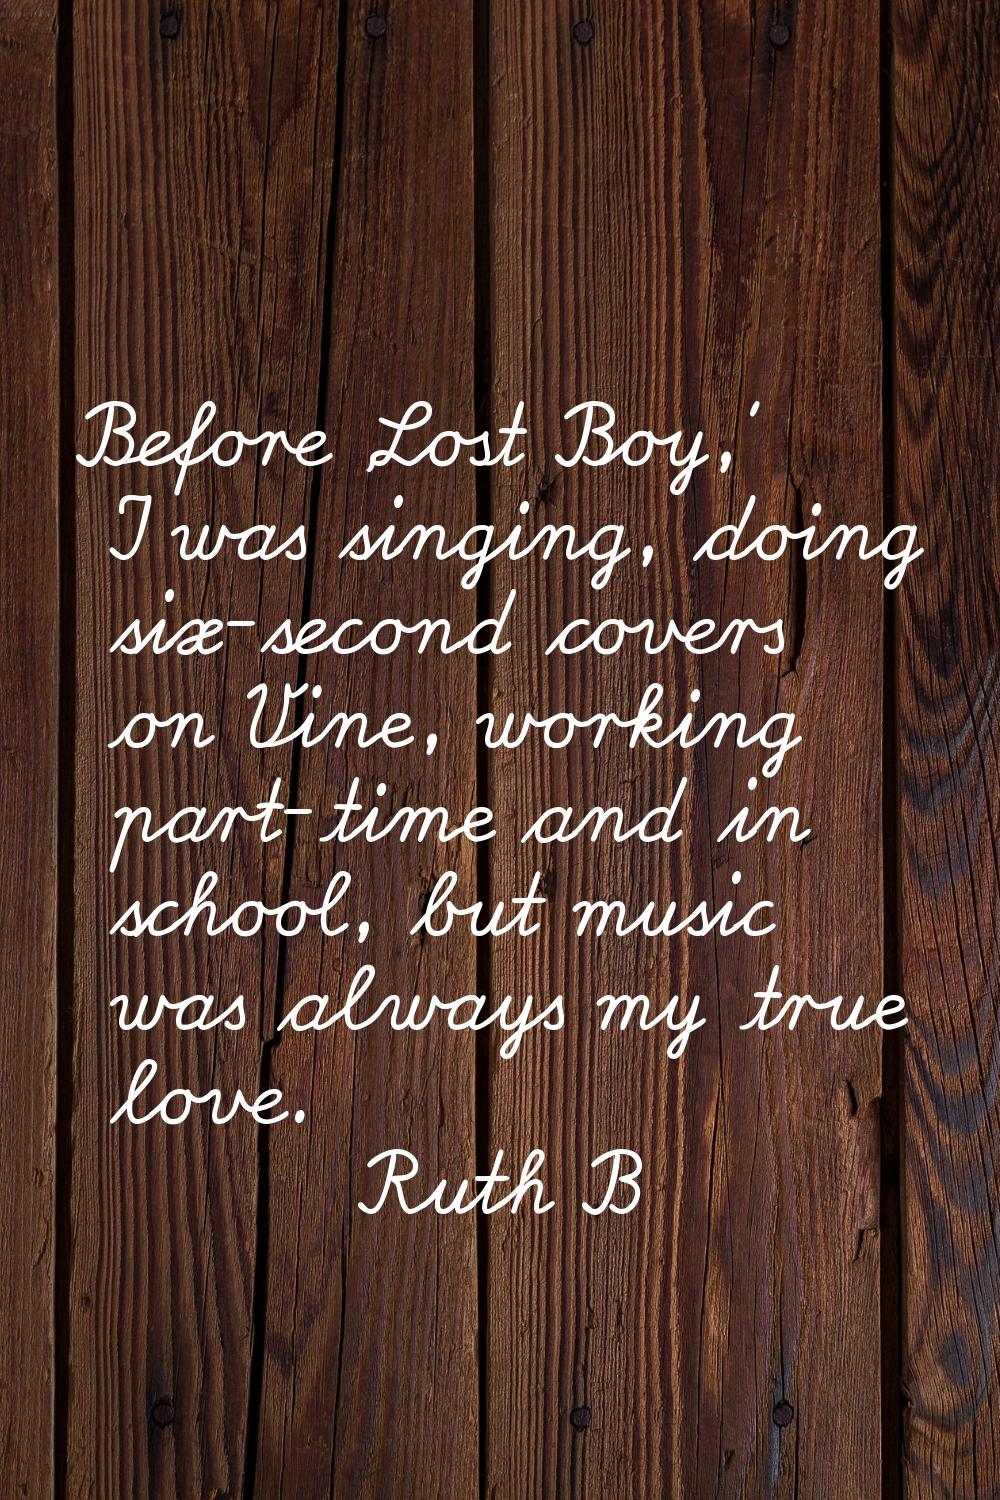 Before 'Lost Boy,' I was singing, doing six-second covers on Vine, working part-time and in school,